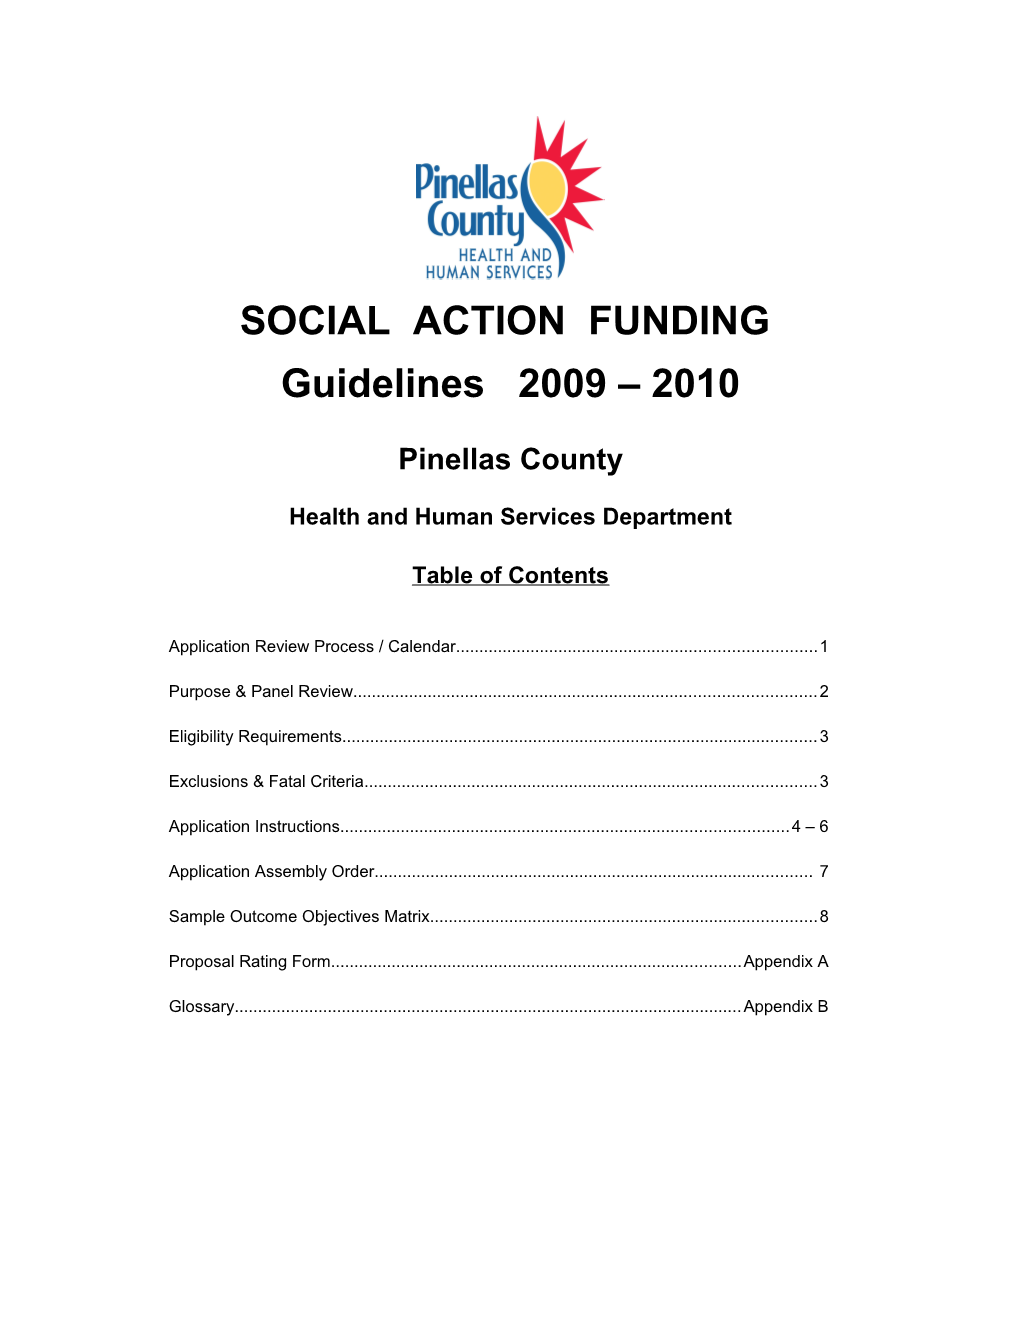 Social Action Funding Guidelines FY 2010Page 1